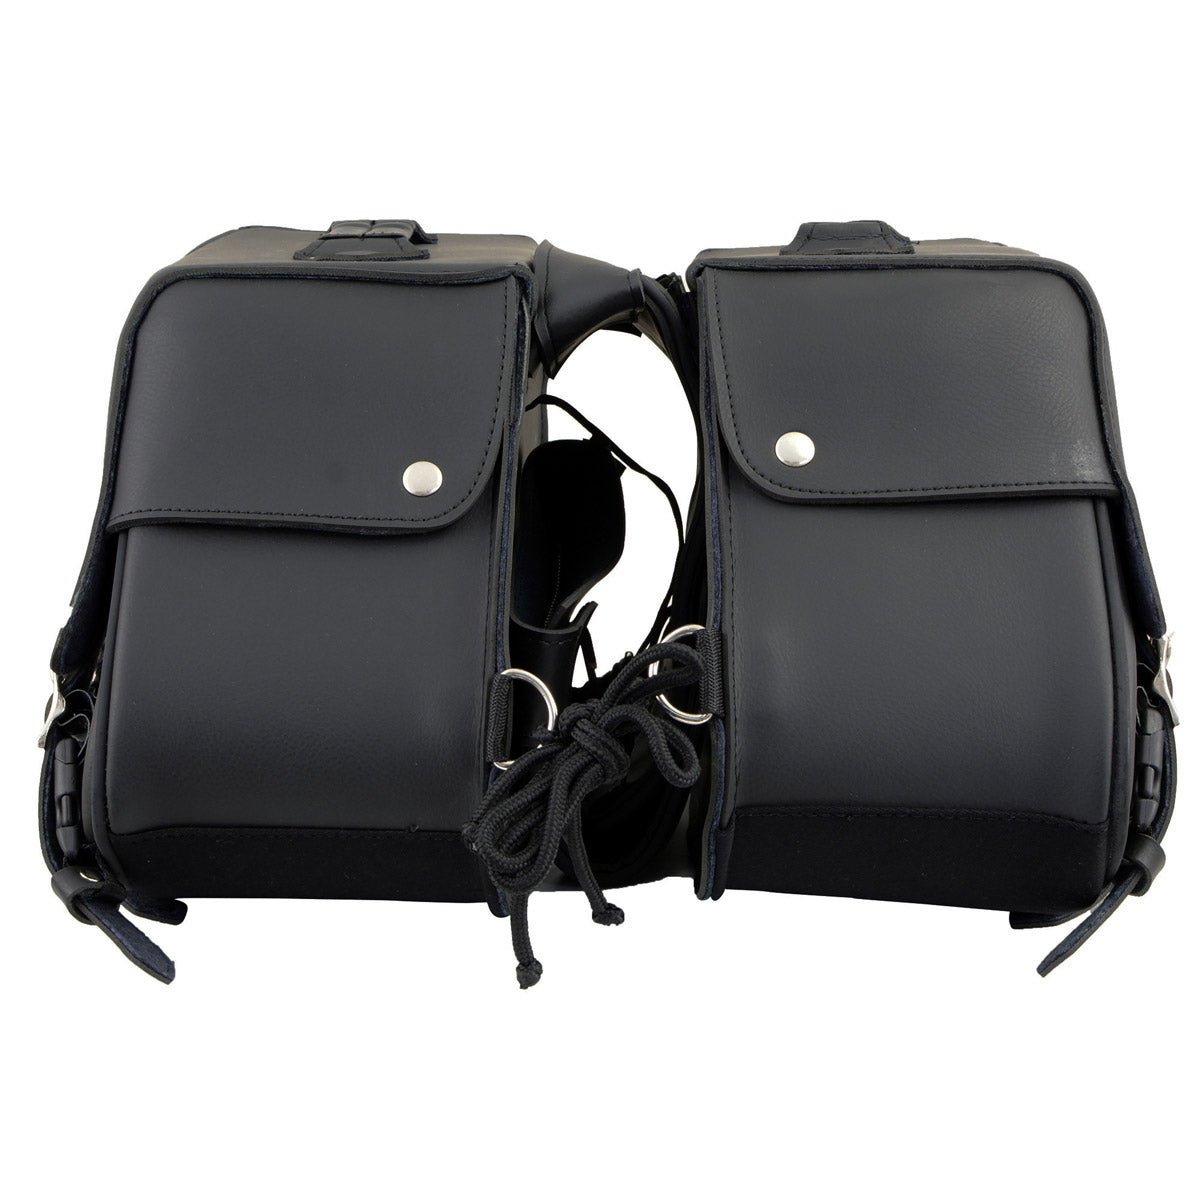 Milwaukee Leather SH66901ZB Medium Size Black PVC Two Straps Throw Over Saddle Bag with Reflective Piping